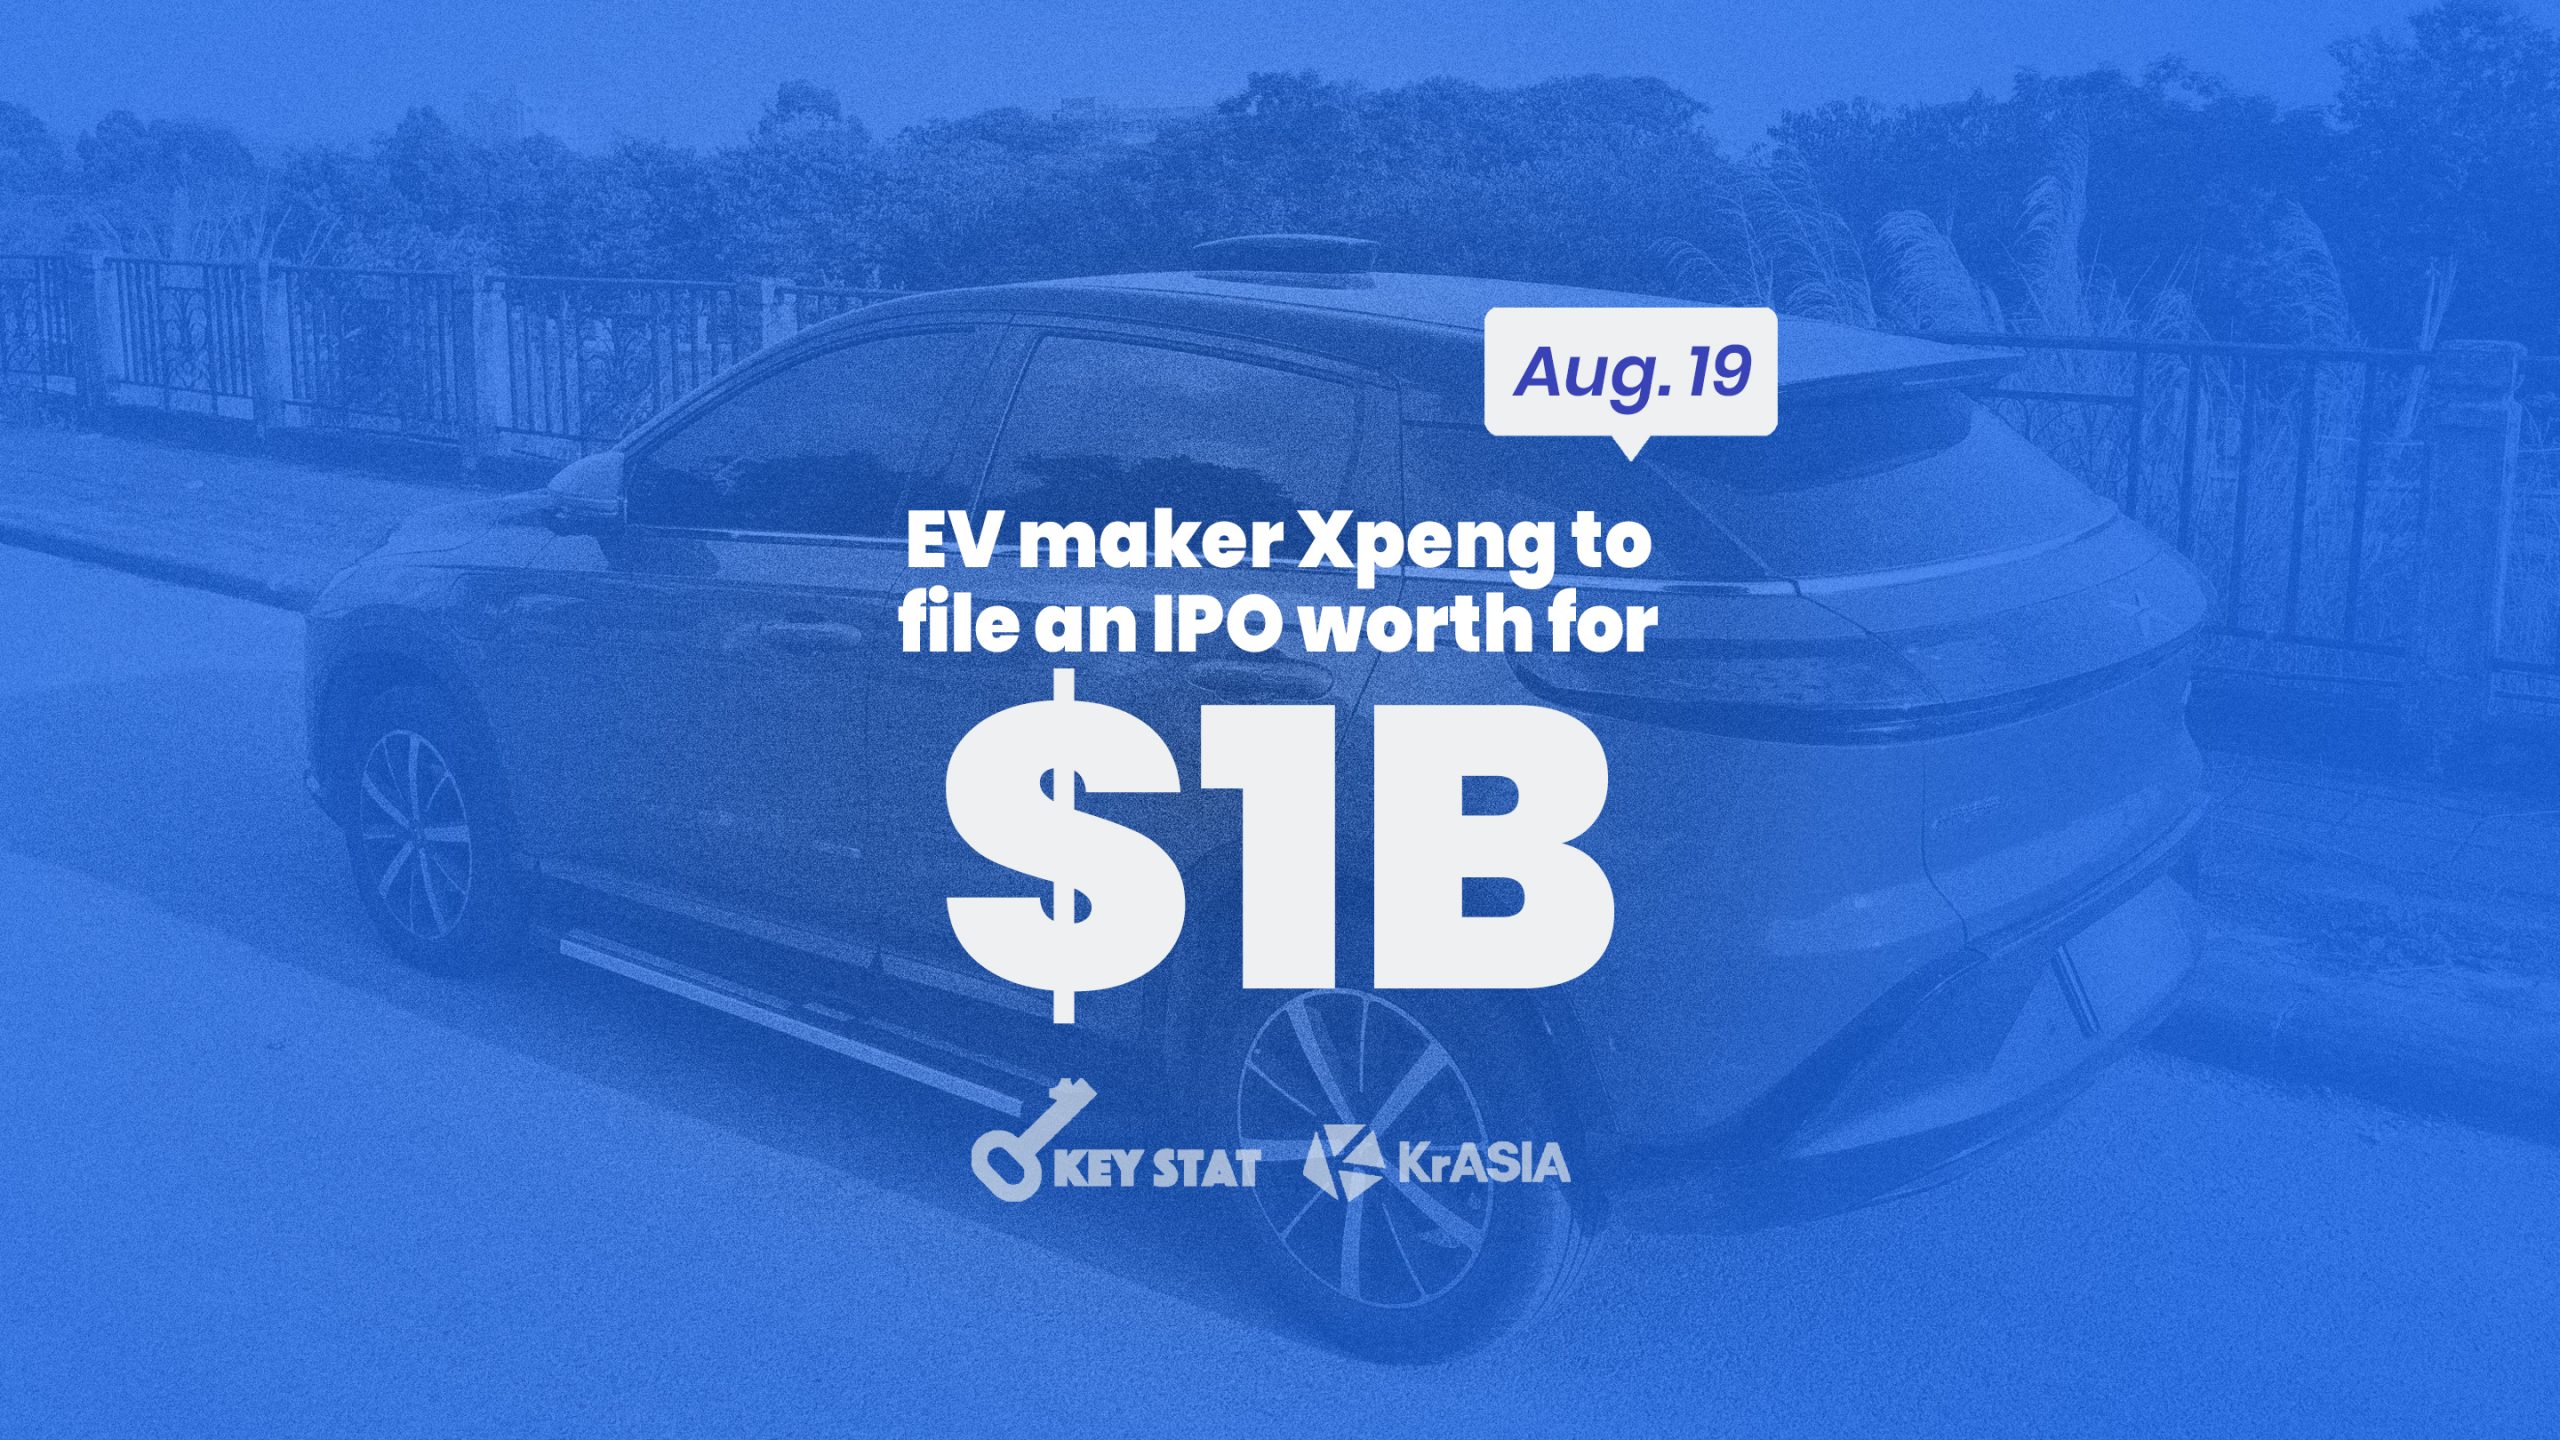 KEY STAT | China’s EV maker Xpeng reportedly filing for US IPO